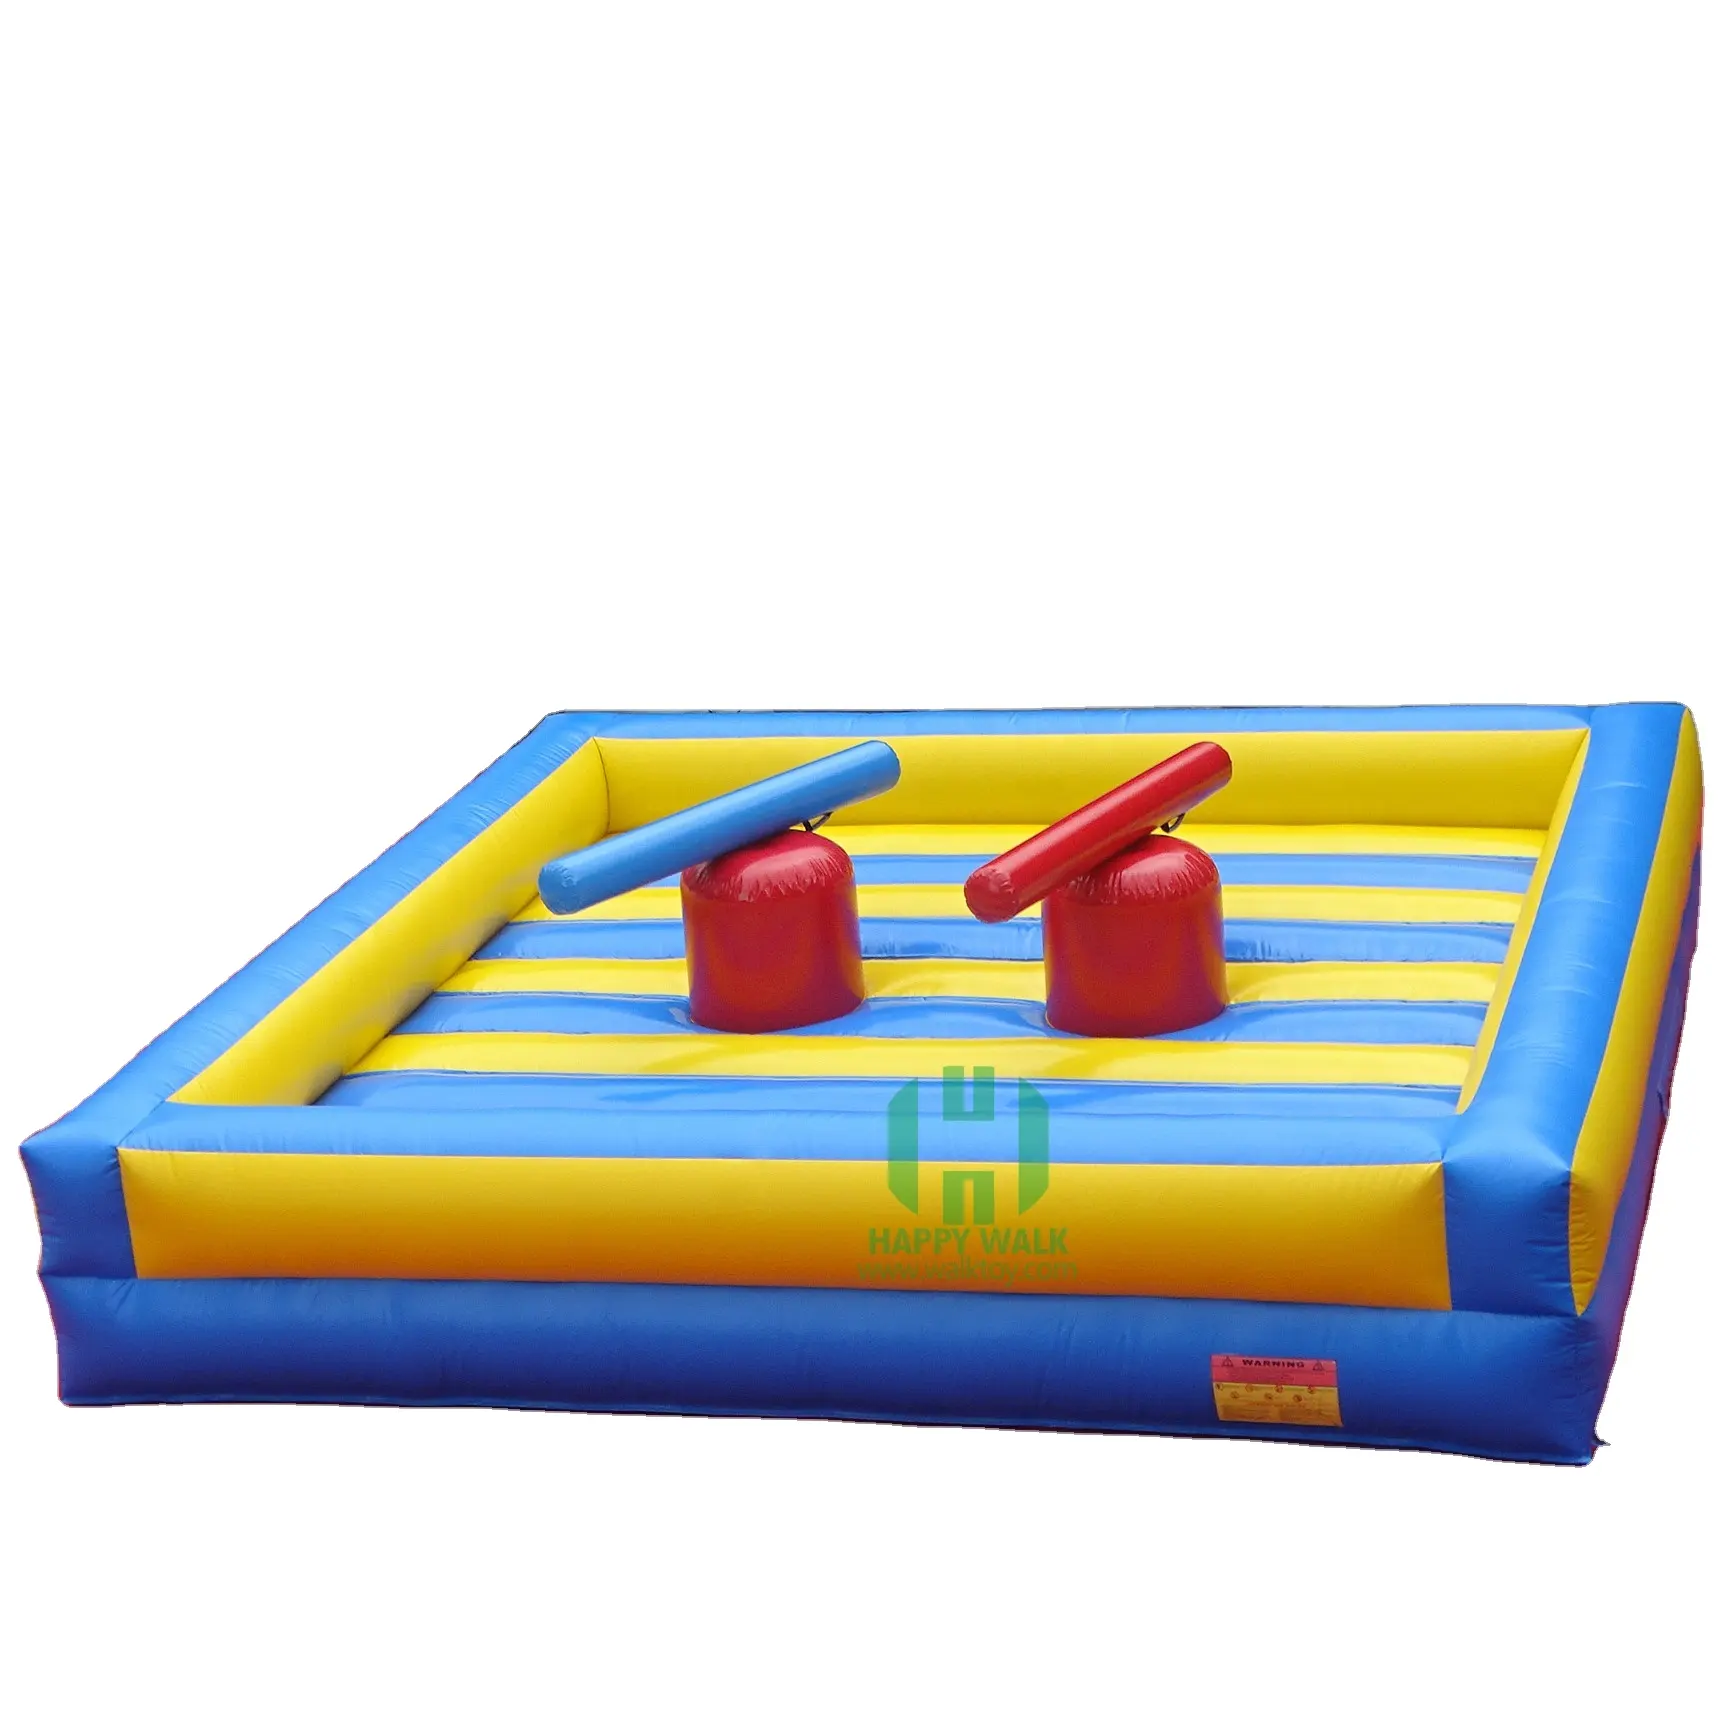 Inflable gladiador justa/inflable justa juguetes/inflable gladiador justa juego